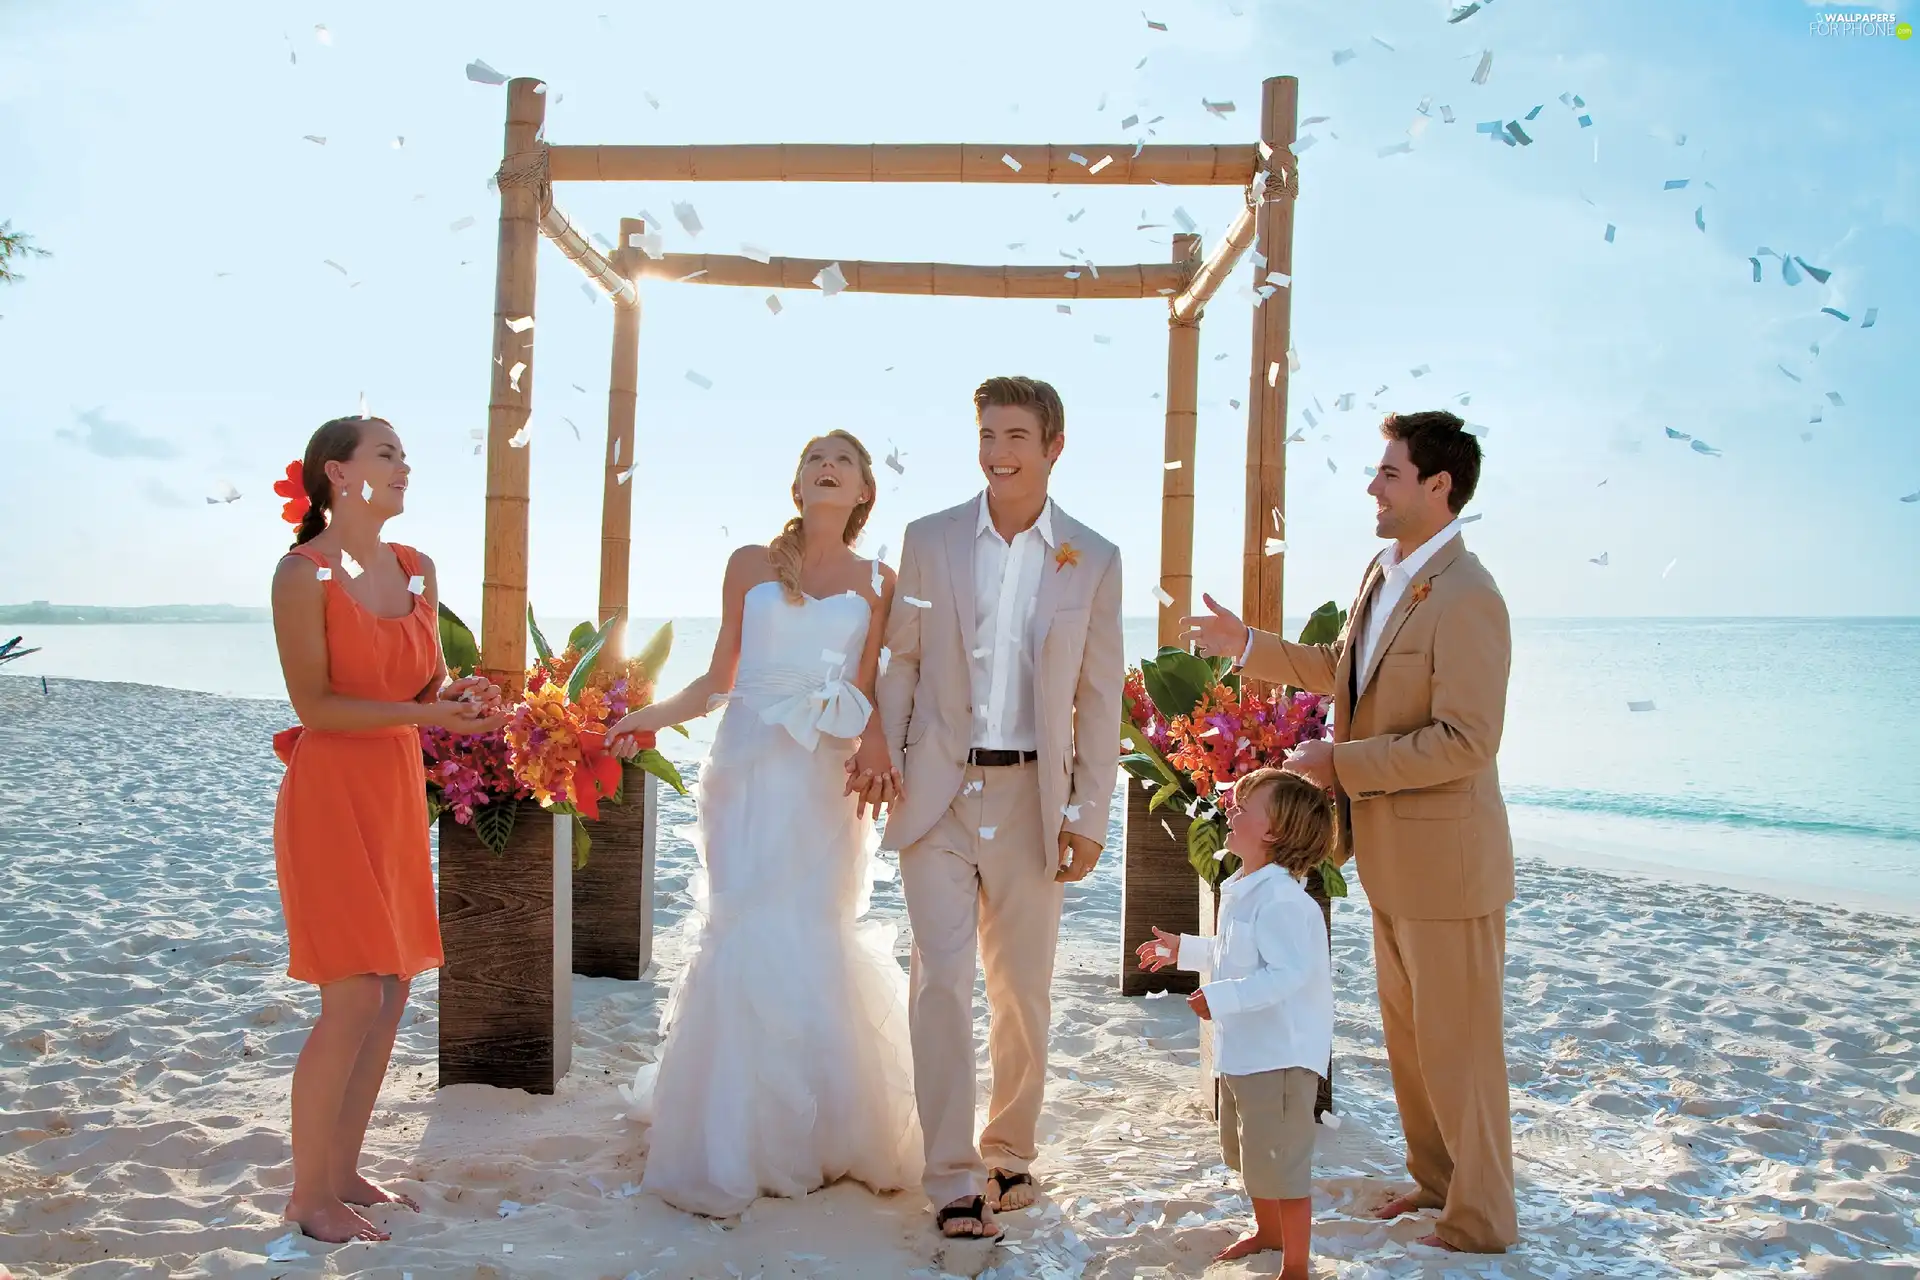 Kid, young, Beaches, Groomsman, Steam, sea, Bouquets